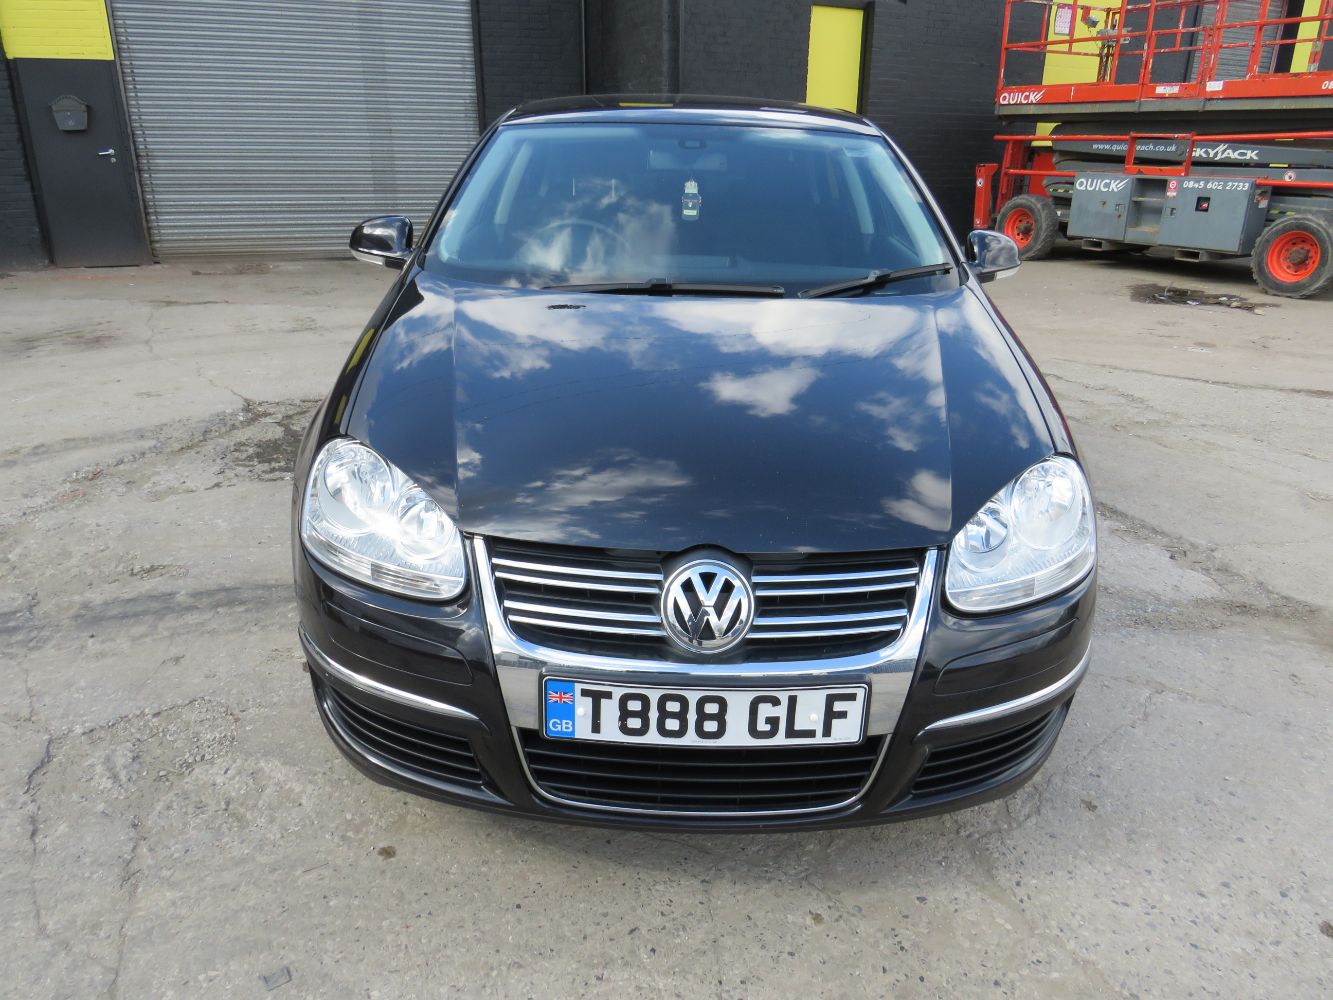 Price reduction, VW Jetta £1800 start and 10% buyers commission only!!!